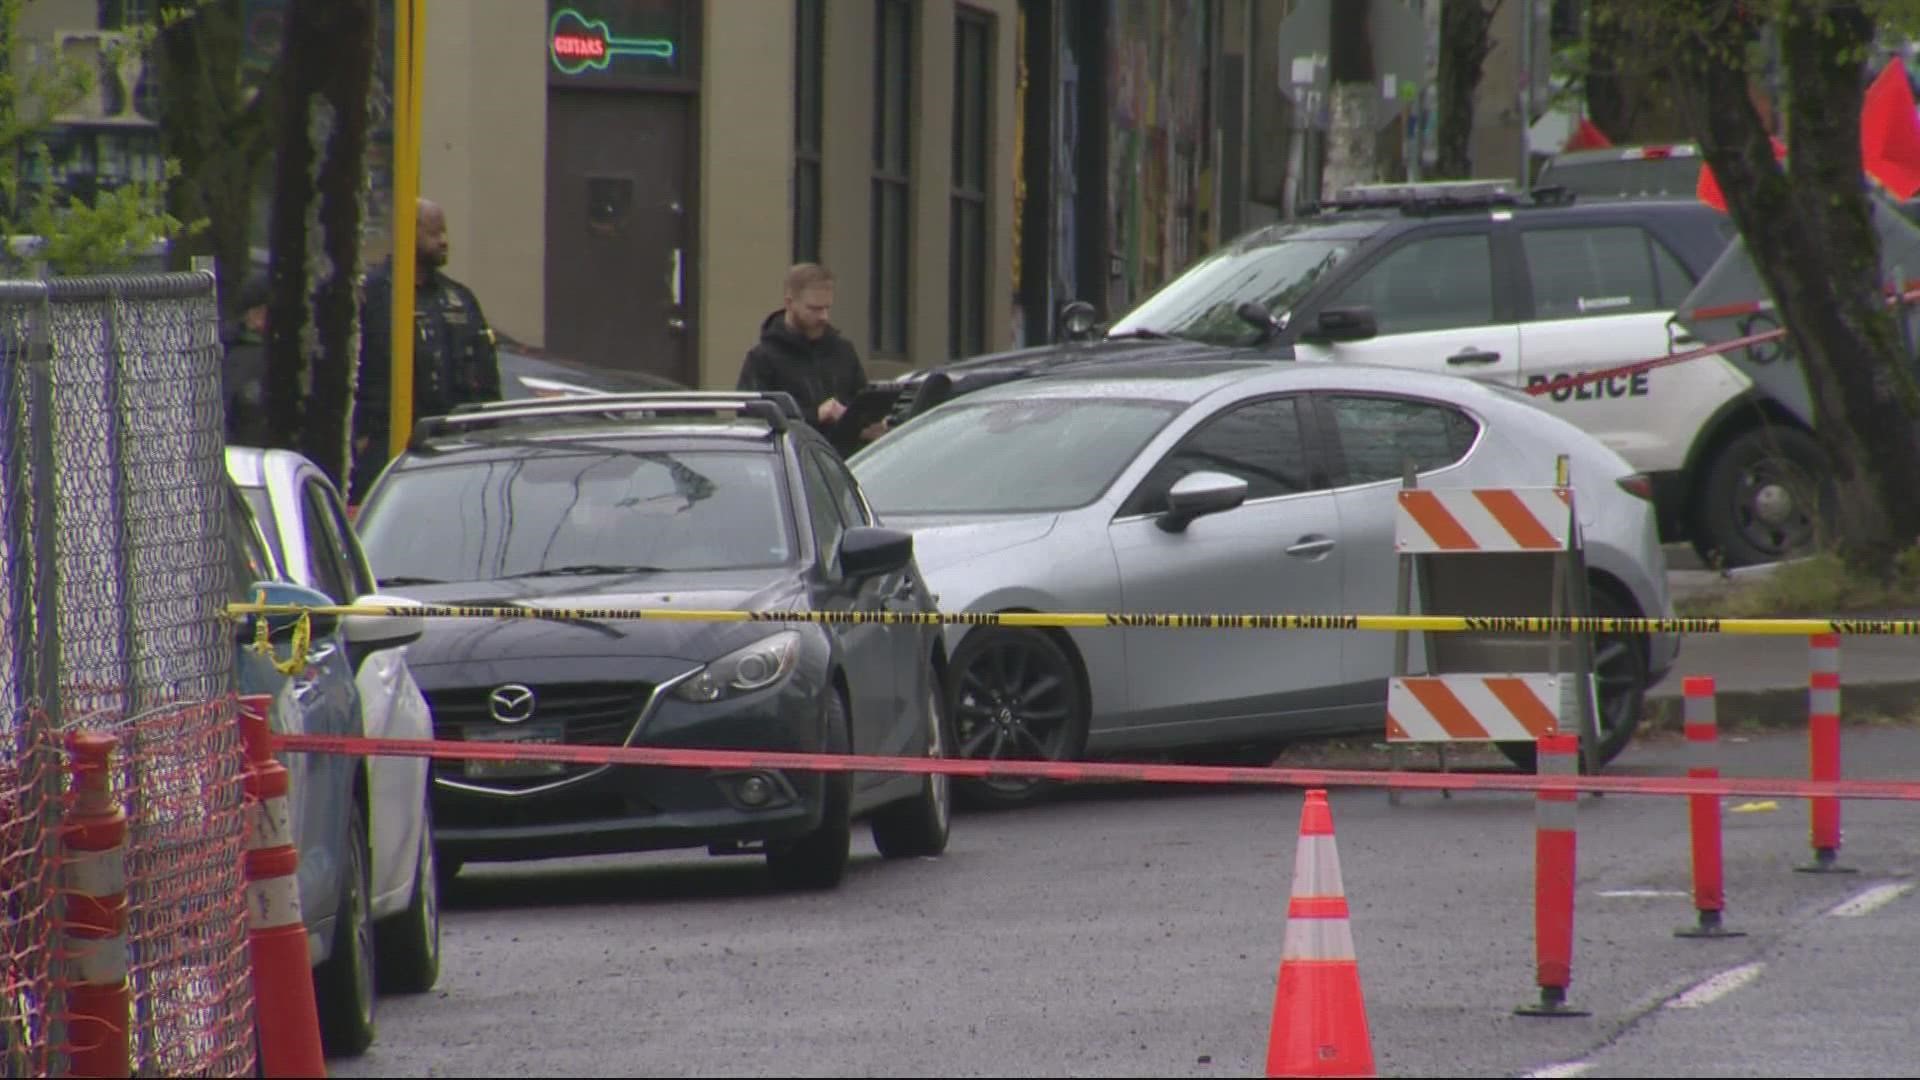 Federal officers with the U.S. Marshals Service were involved in a shooting Monday afternoon in Southeast Portland's Buckman neighborhood.